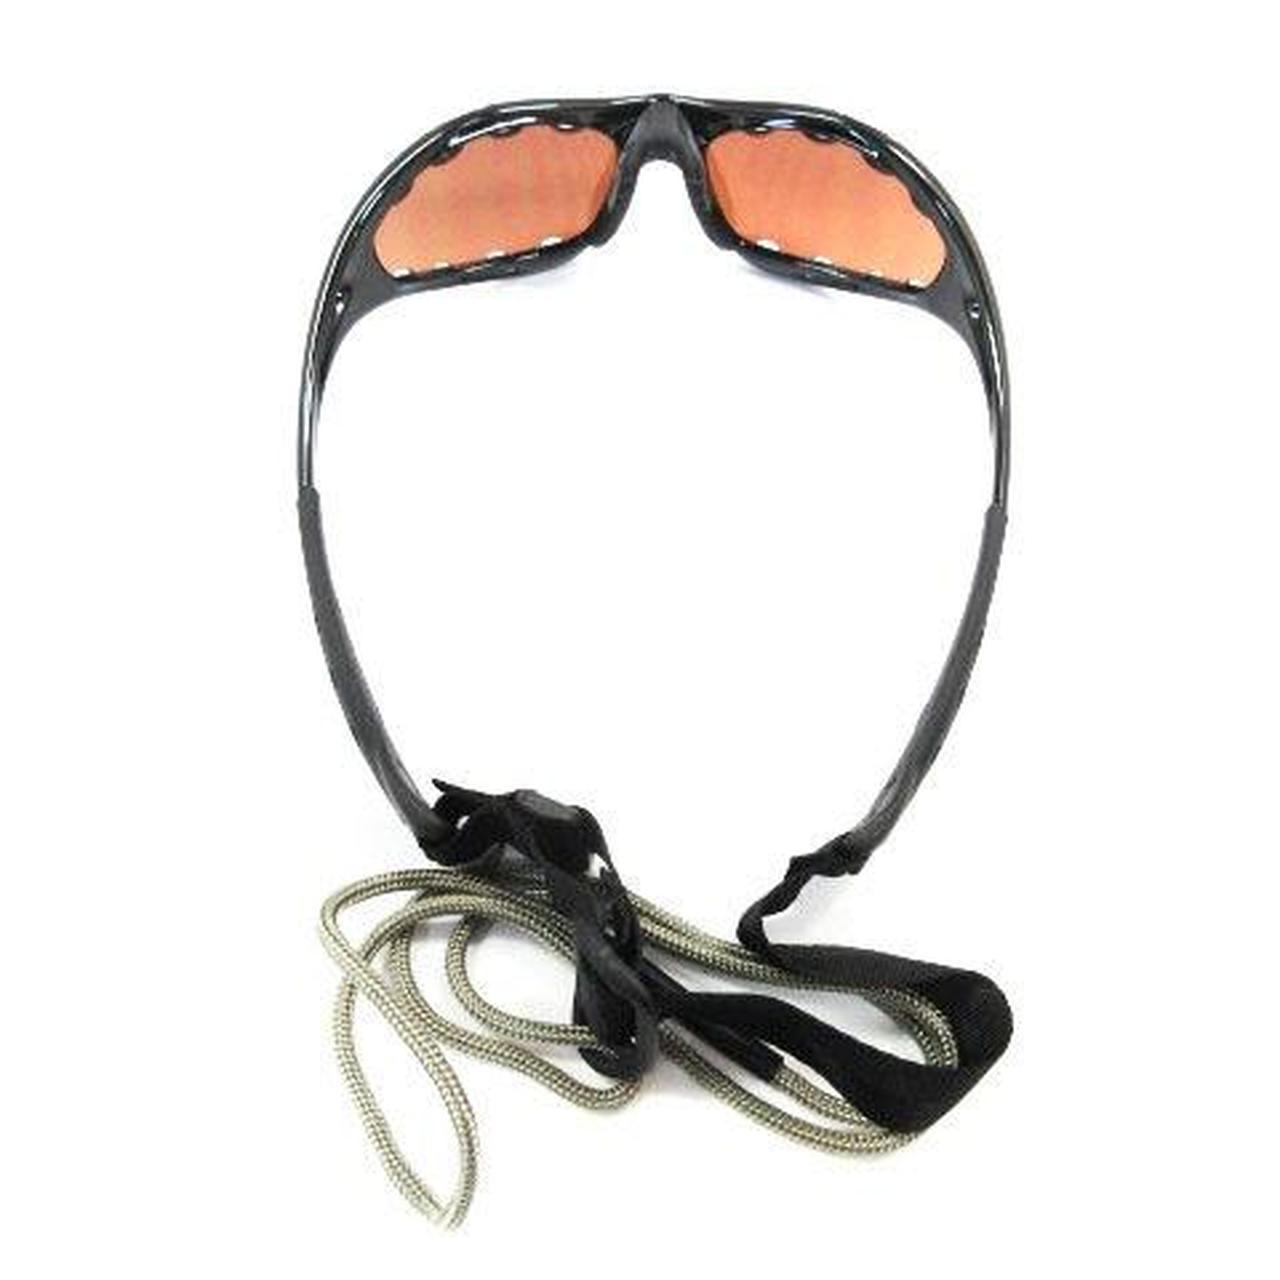 Oakley ‘Racing Jacket’ Jet Black/Persimmon Vented - Known Source